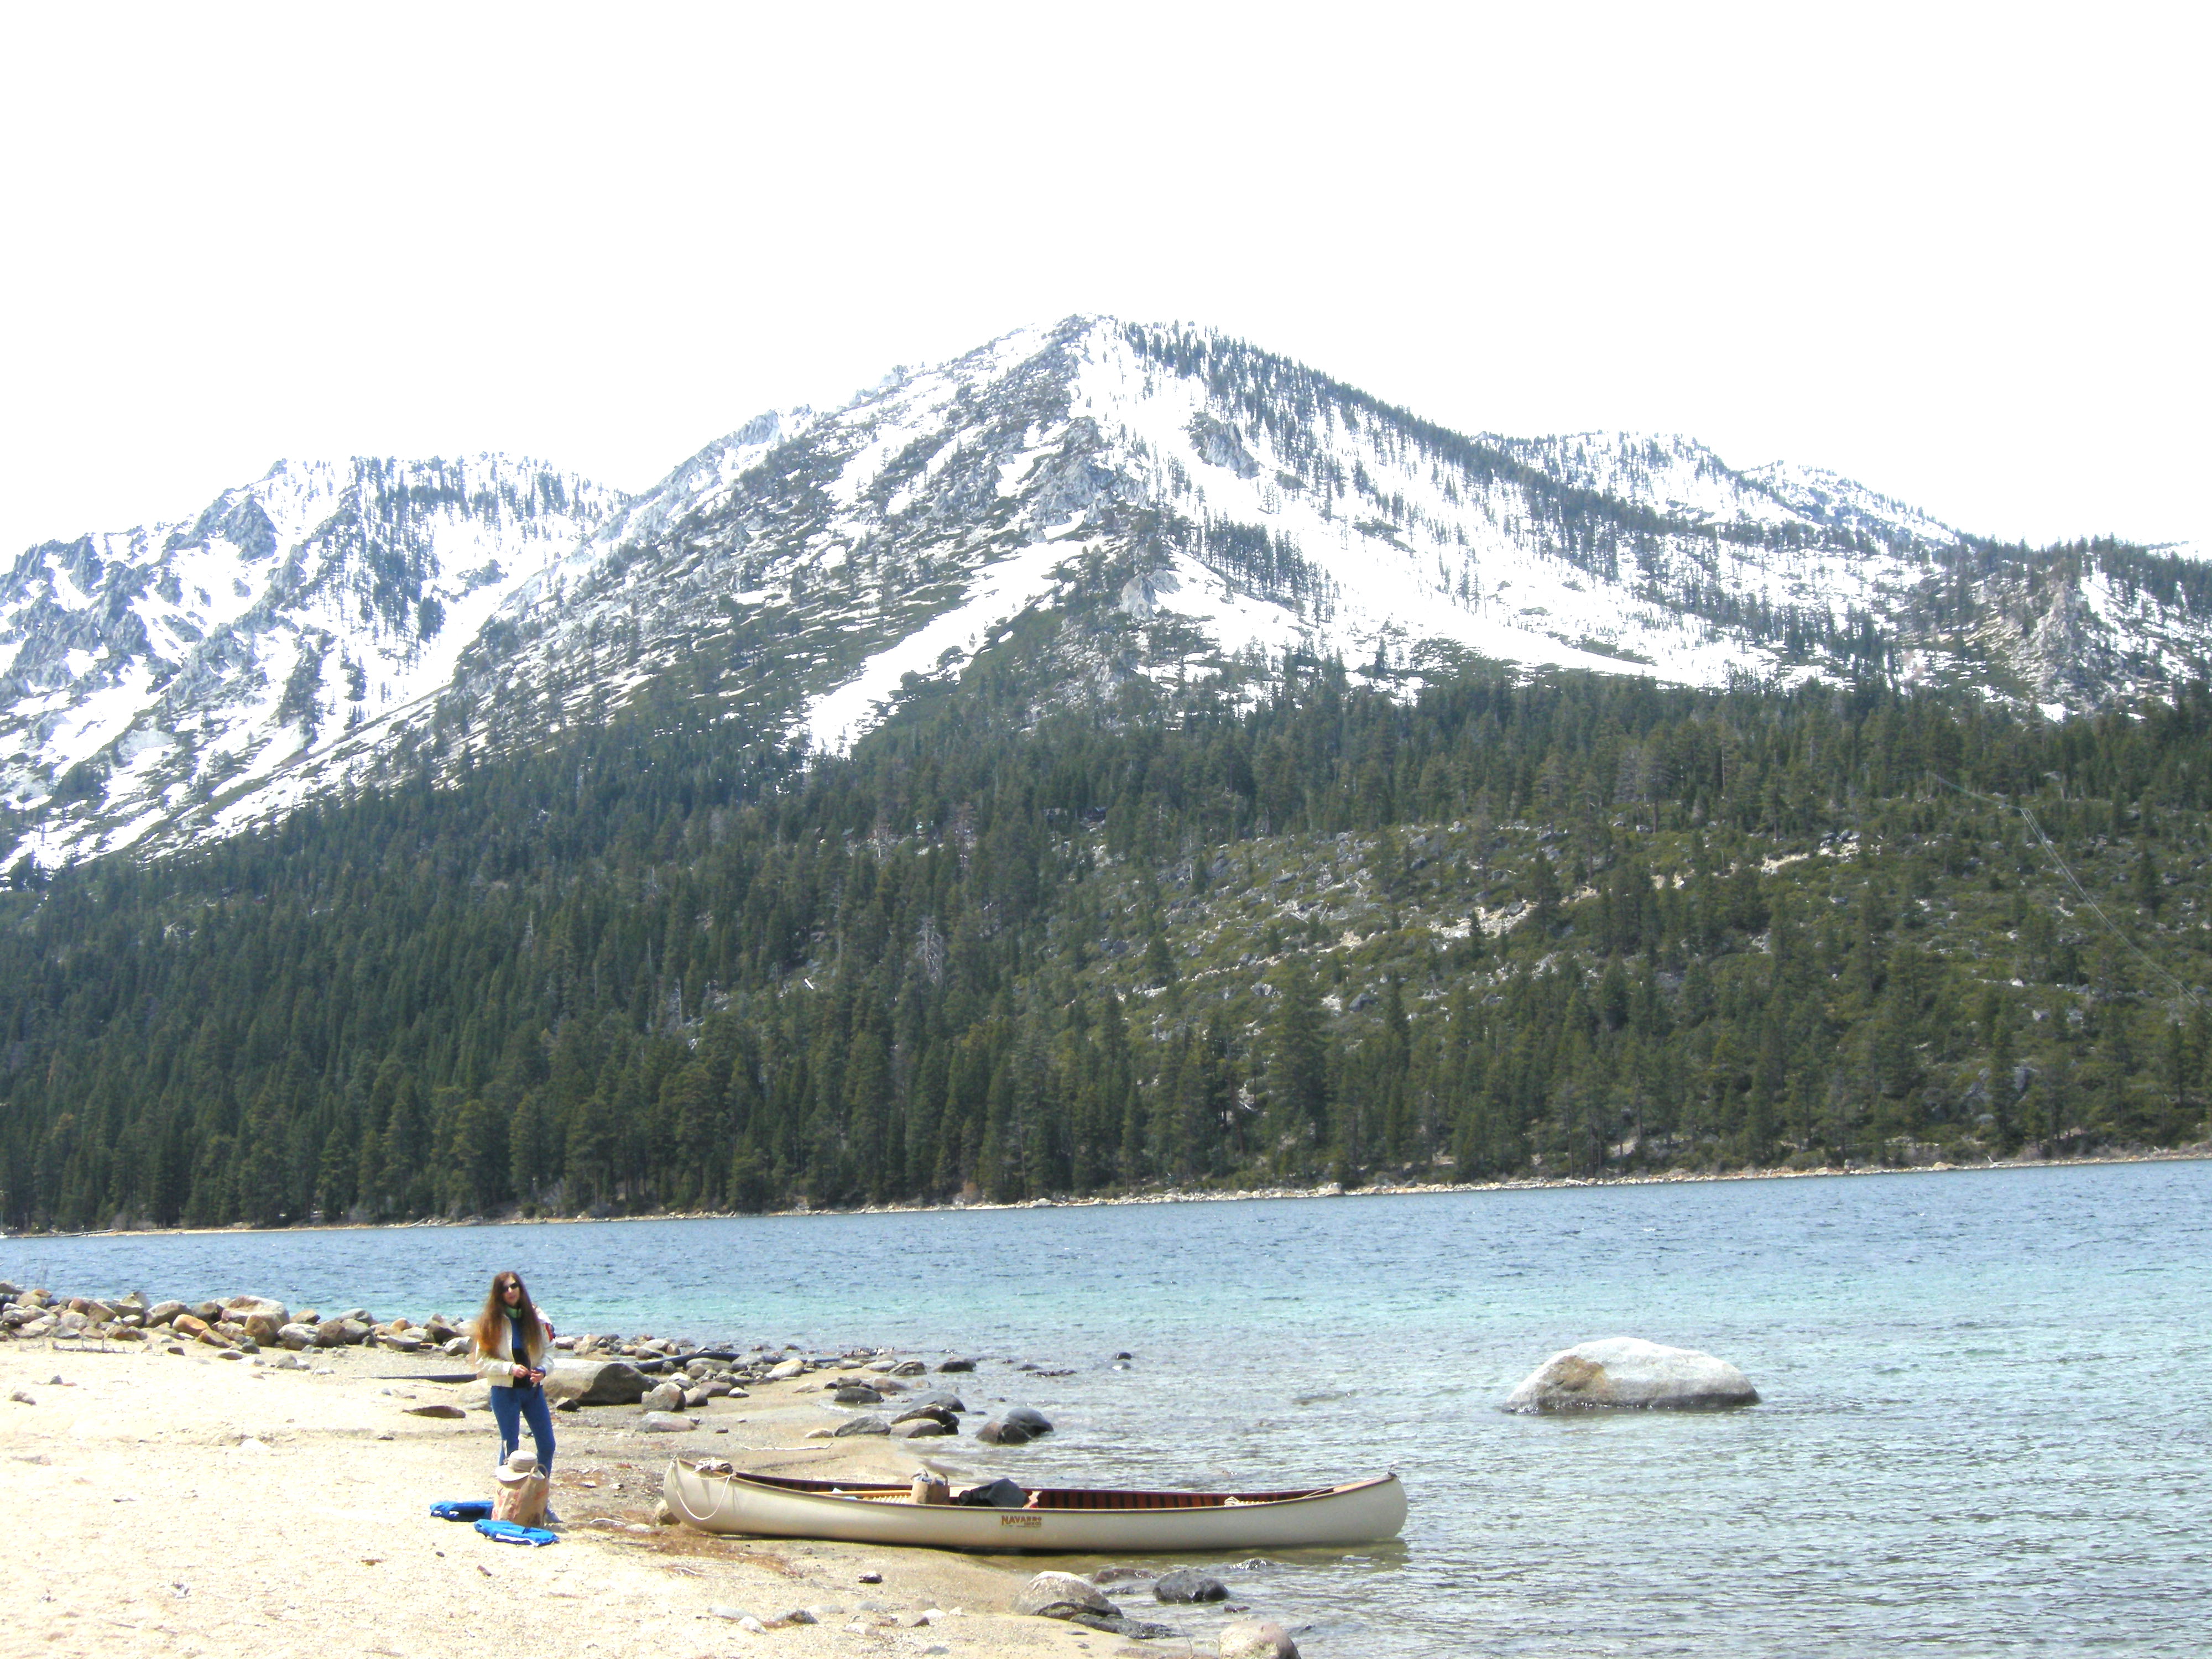 Maggi canoeing at Lake-Tahoe in 2010. Photo by Brian Reinbolt